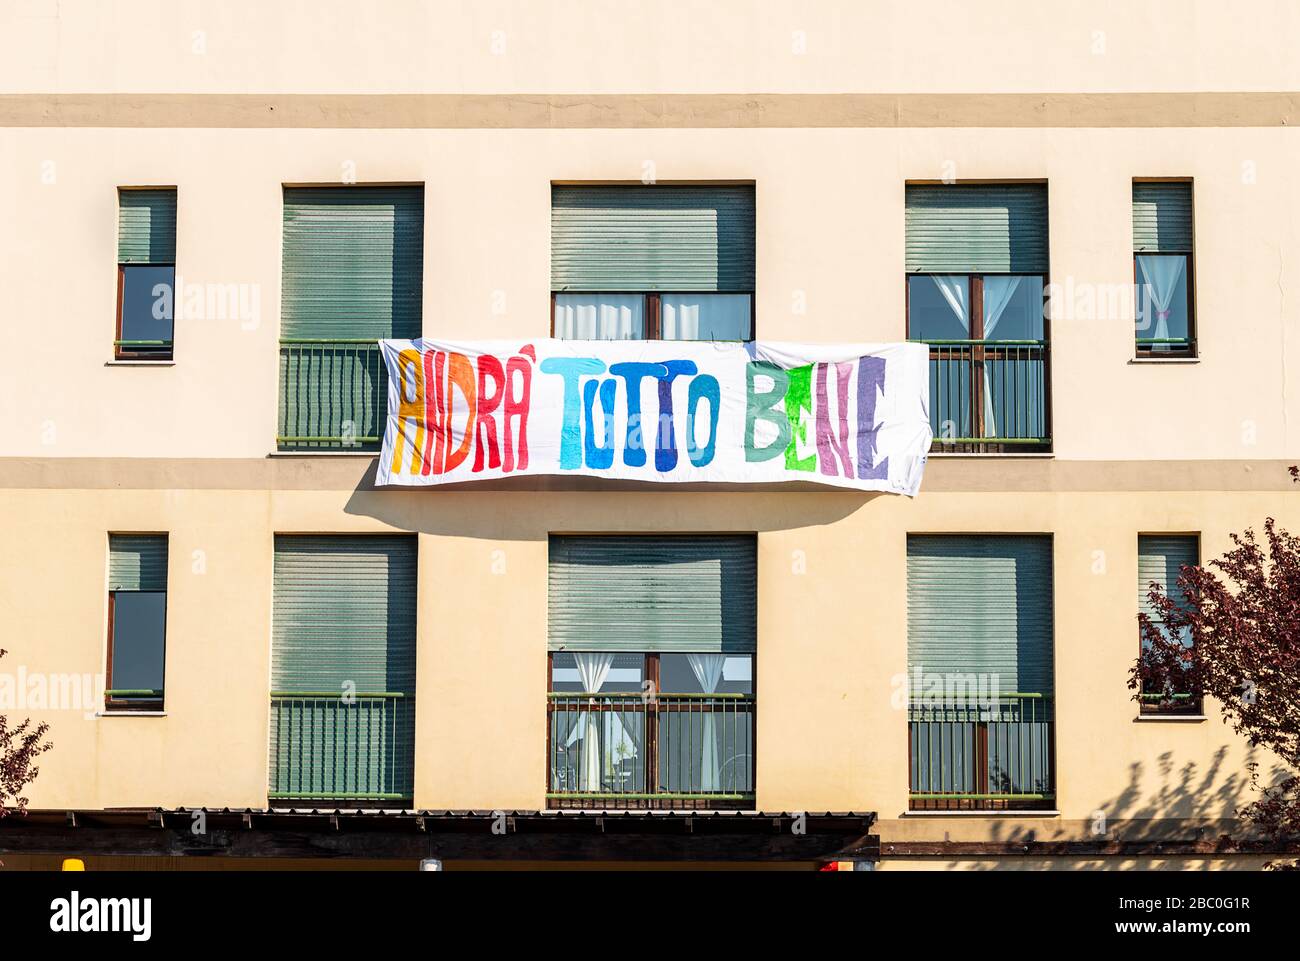 Facade of an house with a banner ‘andrà tutto bene’, italian message of hope in coronavirus times Stock Photo